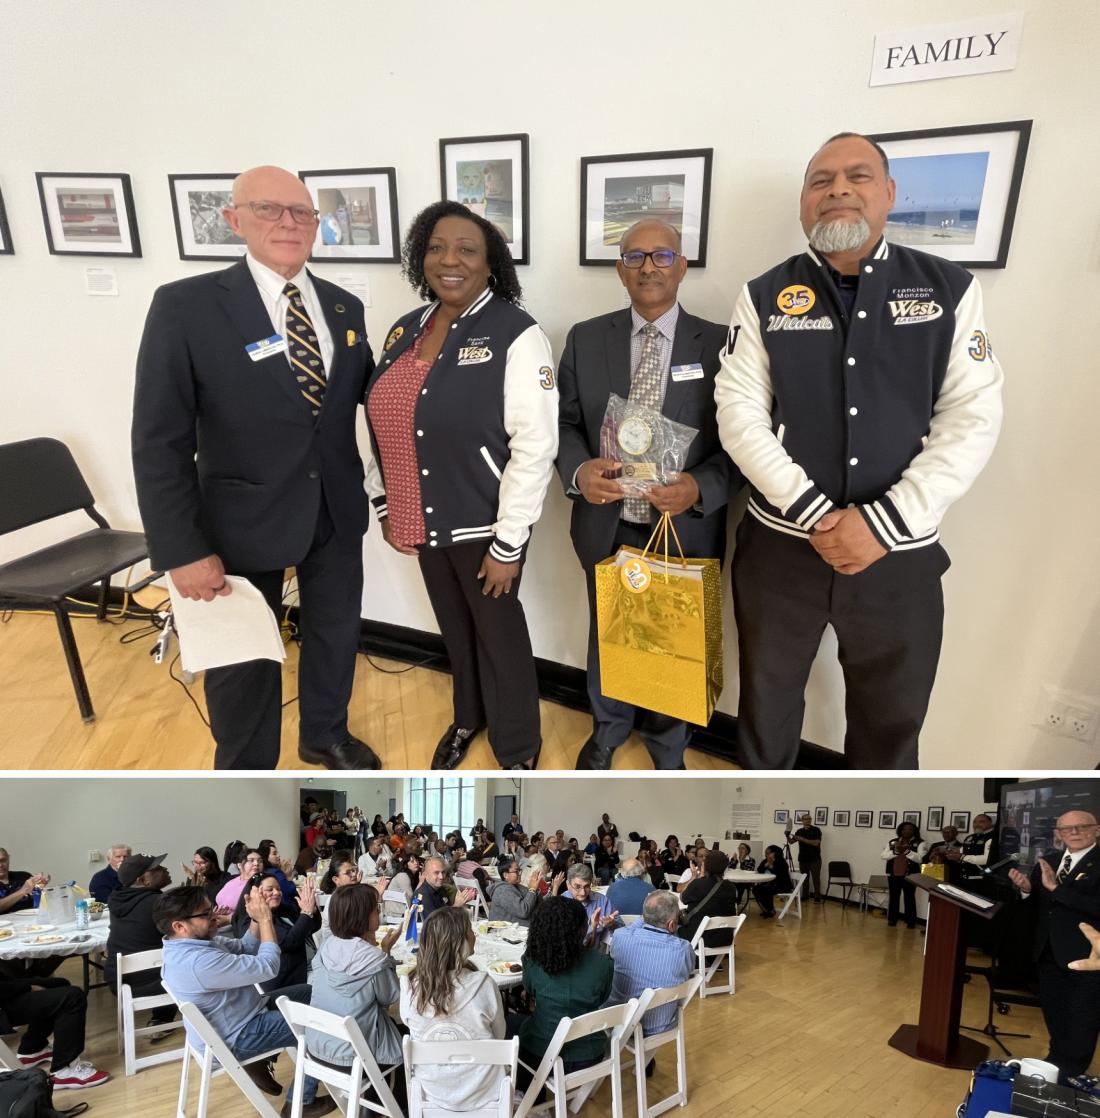 Faculty and staff gathered in-person and online to honor service milestones, achievement of tenure and retirees while enjoying the Fostering Photovoice exhibit in the campus gallery 